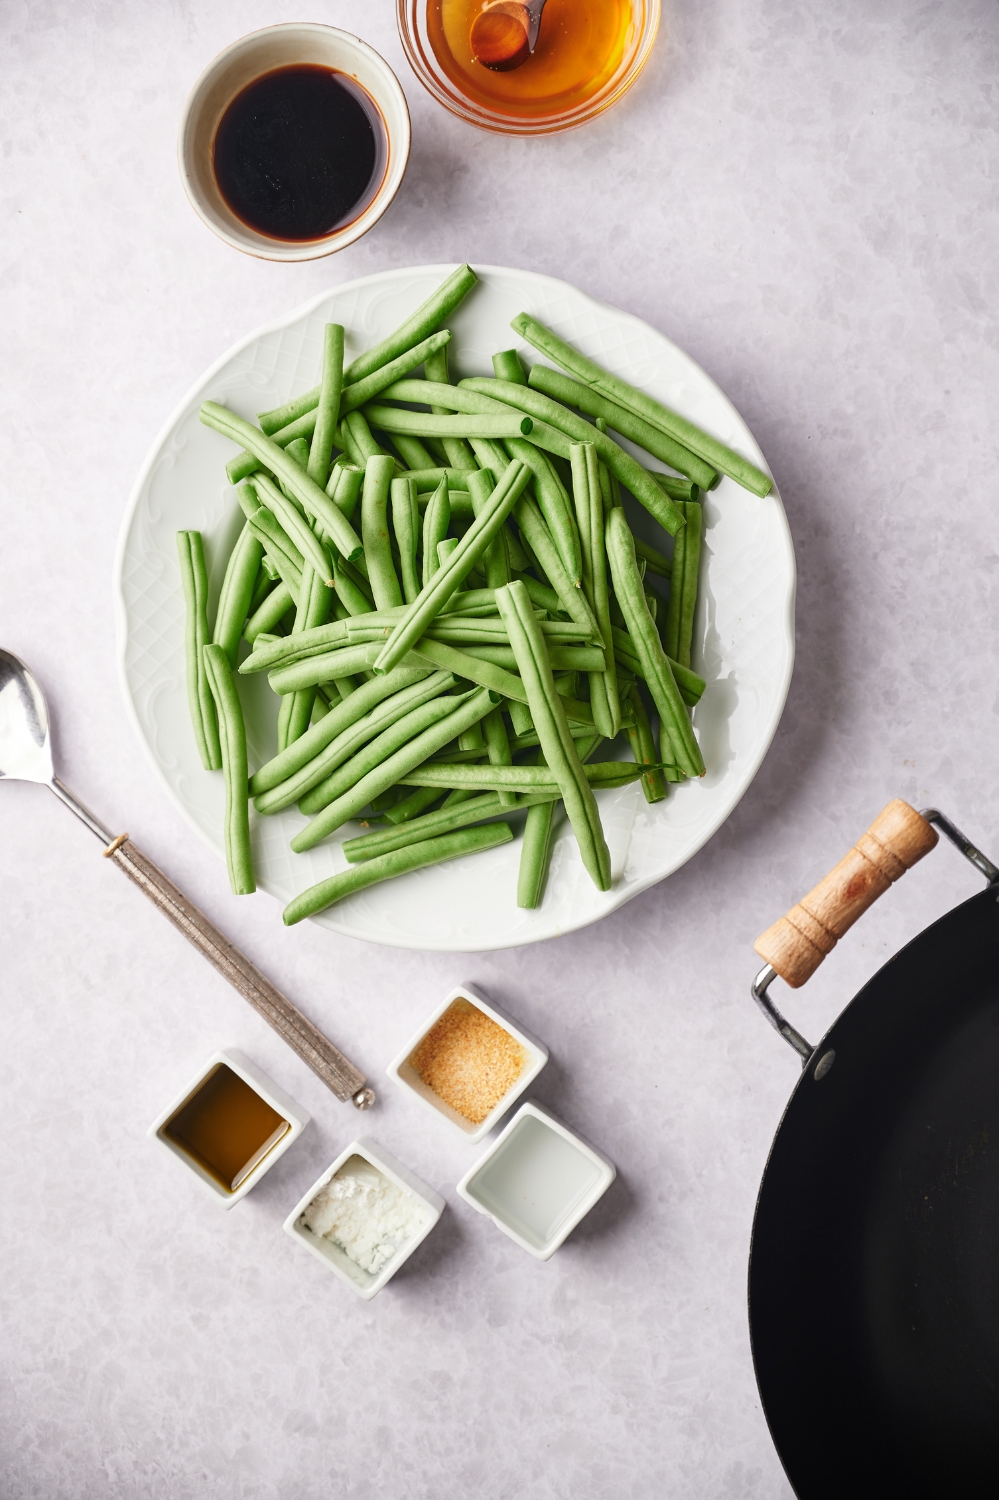 An assortment of ingredients including a plate filled with fresh green beans and small bowls of honey, soy sauce, and spices. There is a black skillet in the corner.